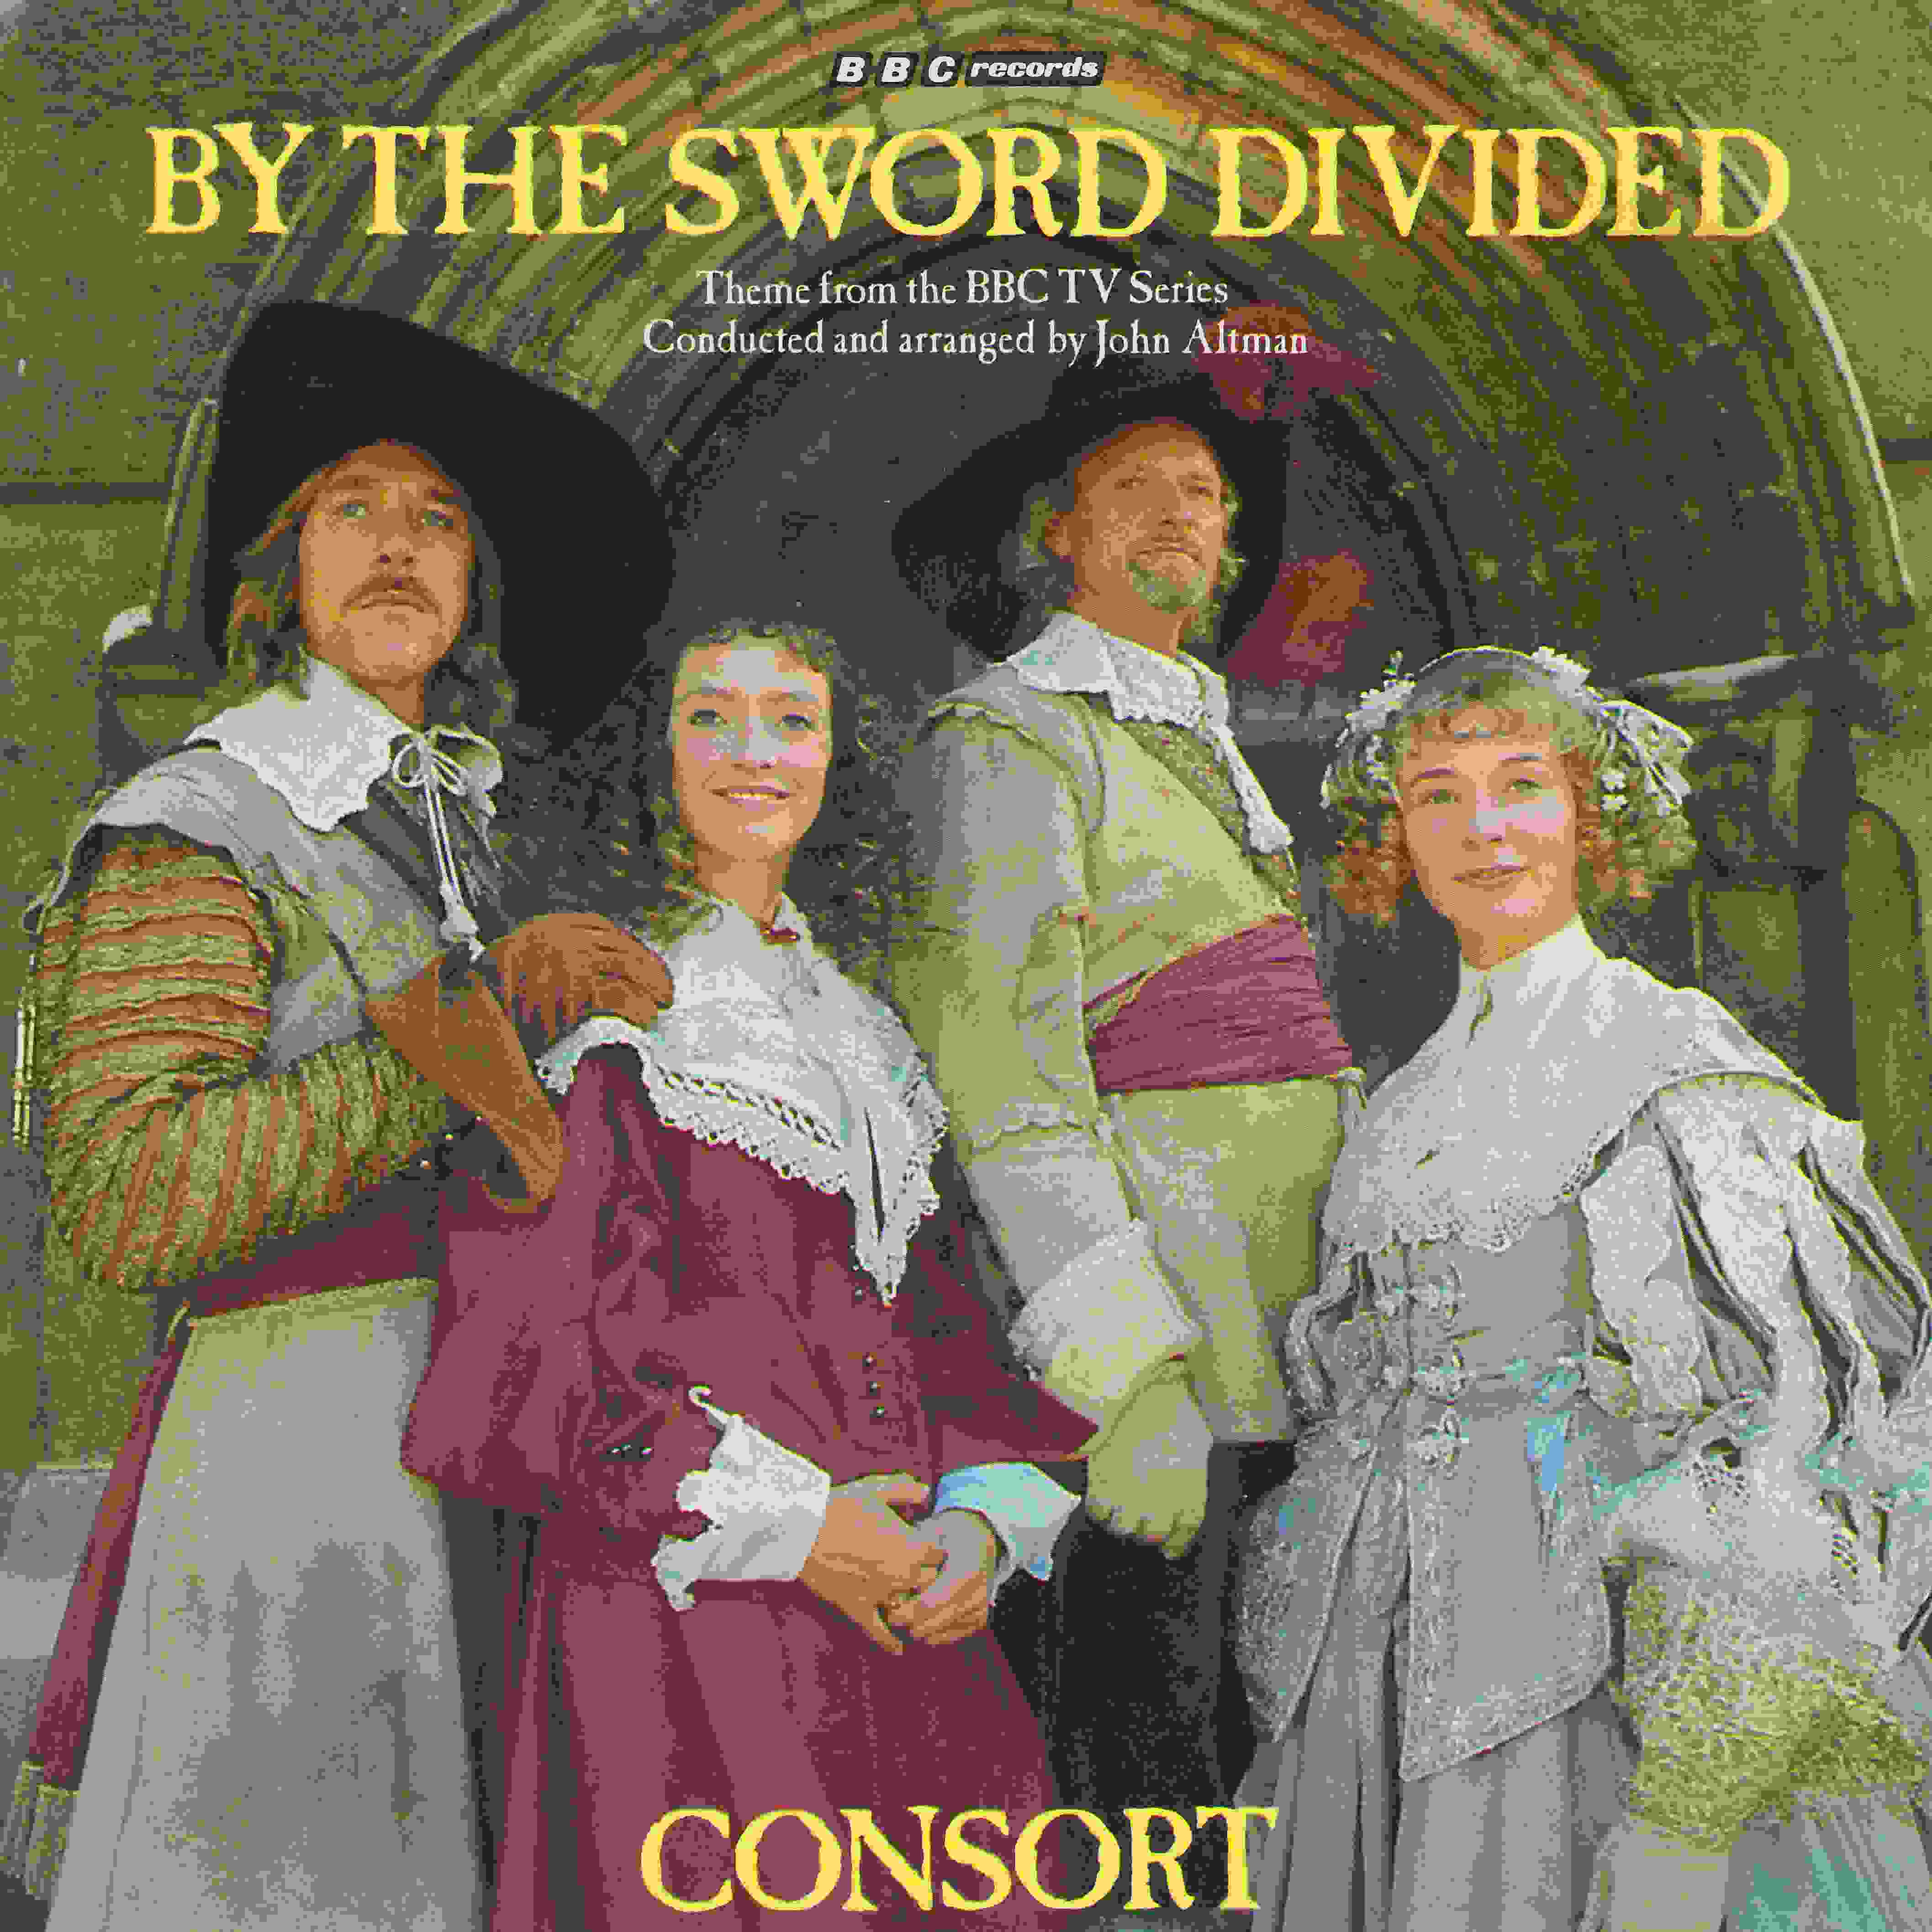 Picture of RESL 137 By the sword divided by artist Consort from the BBC singles - Records and Tapes library